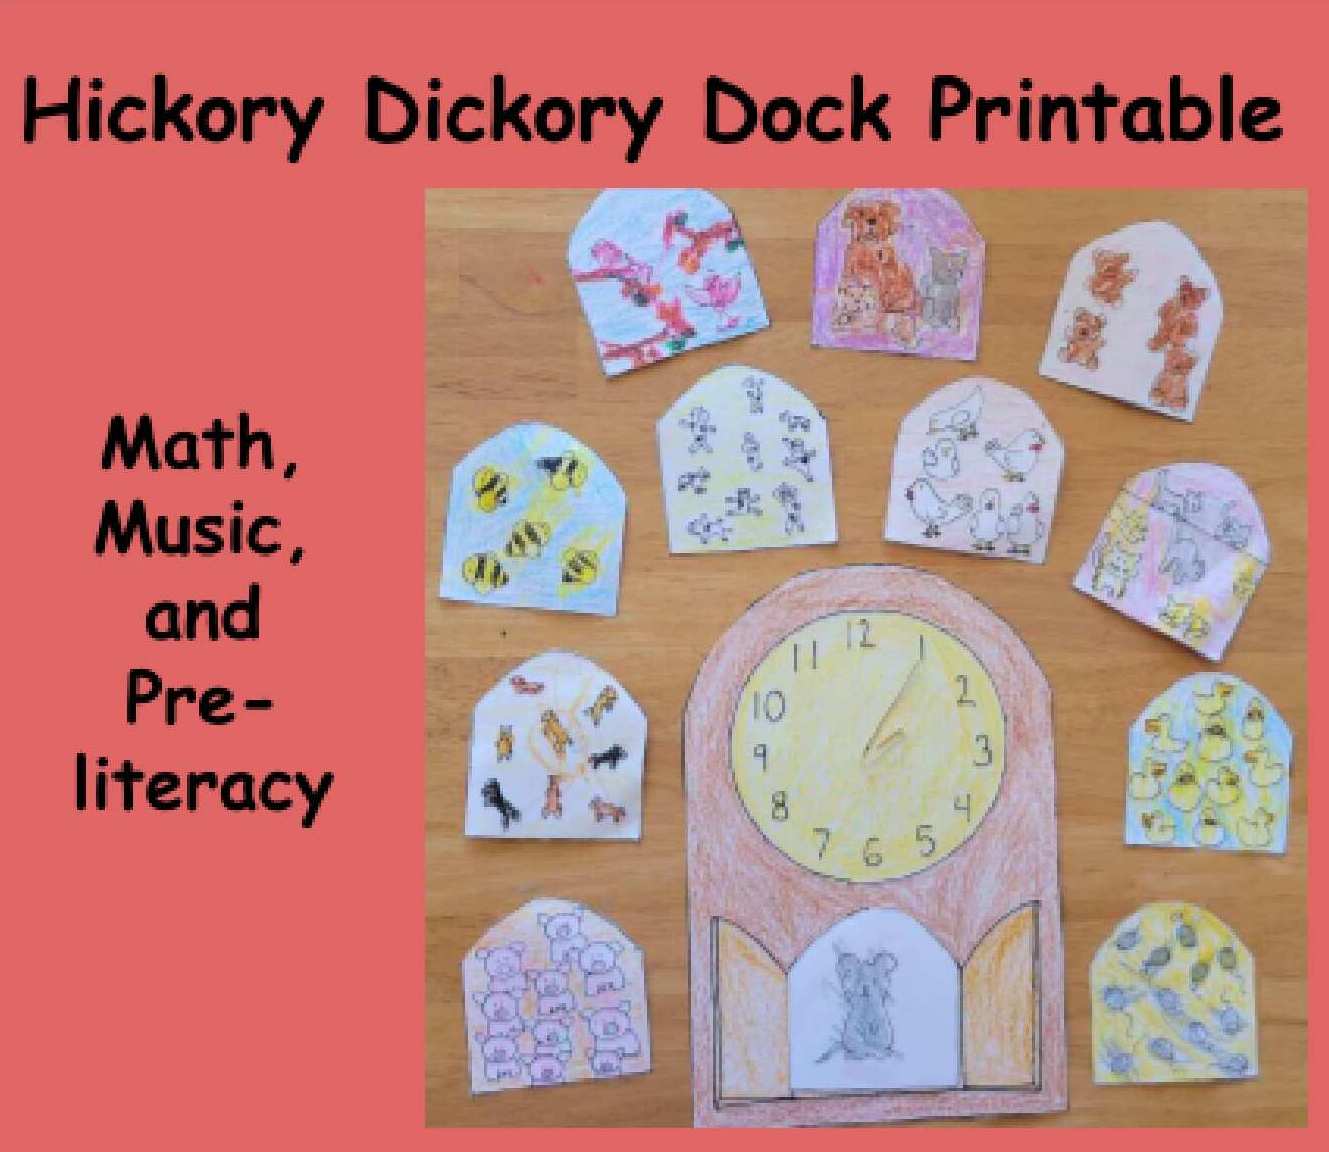 Hickory Dickory Dock Printable Picture